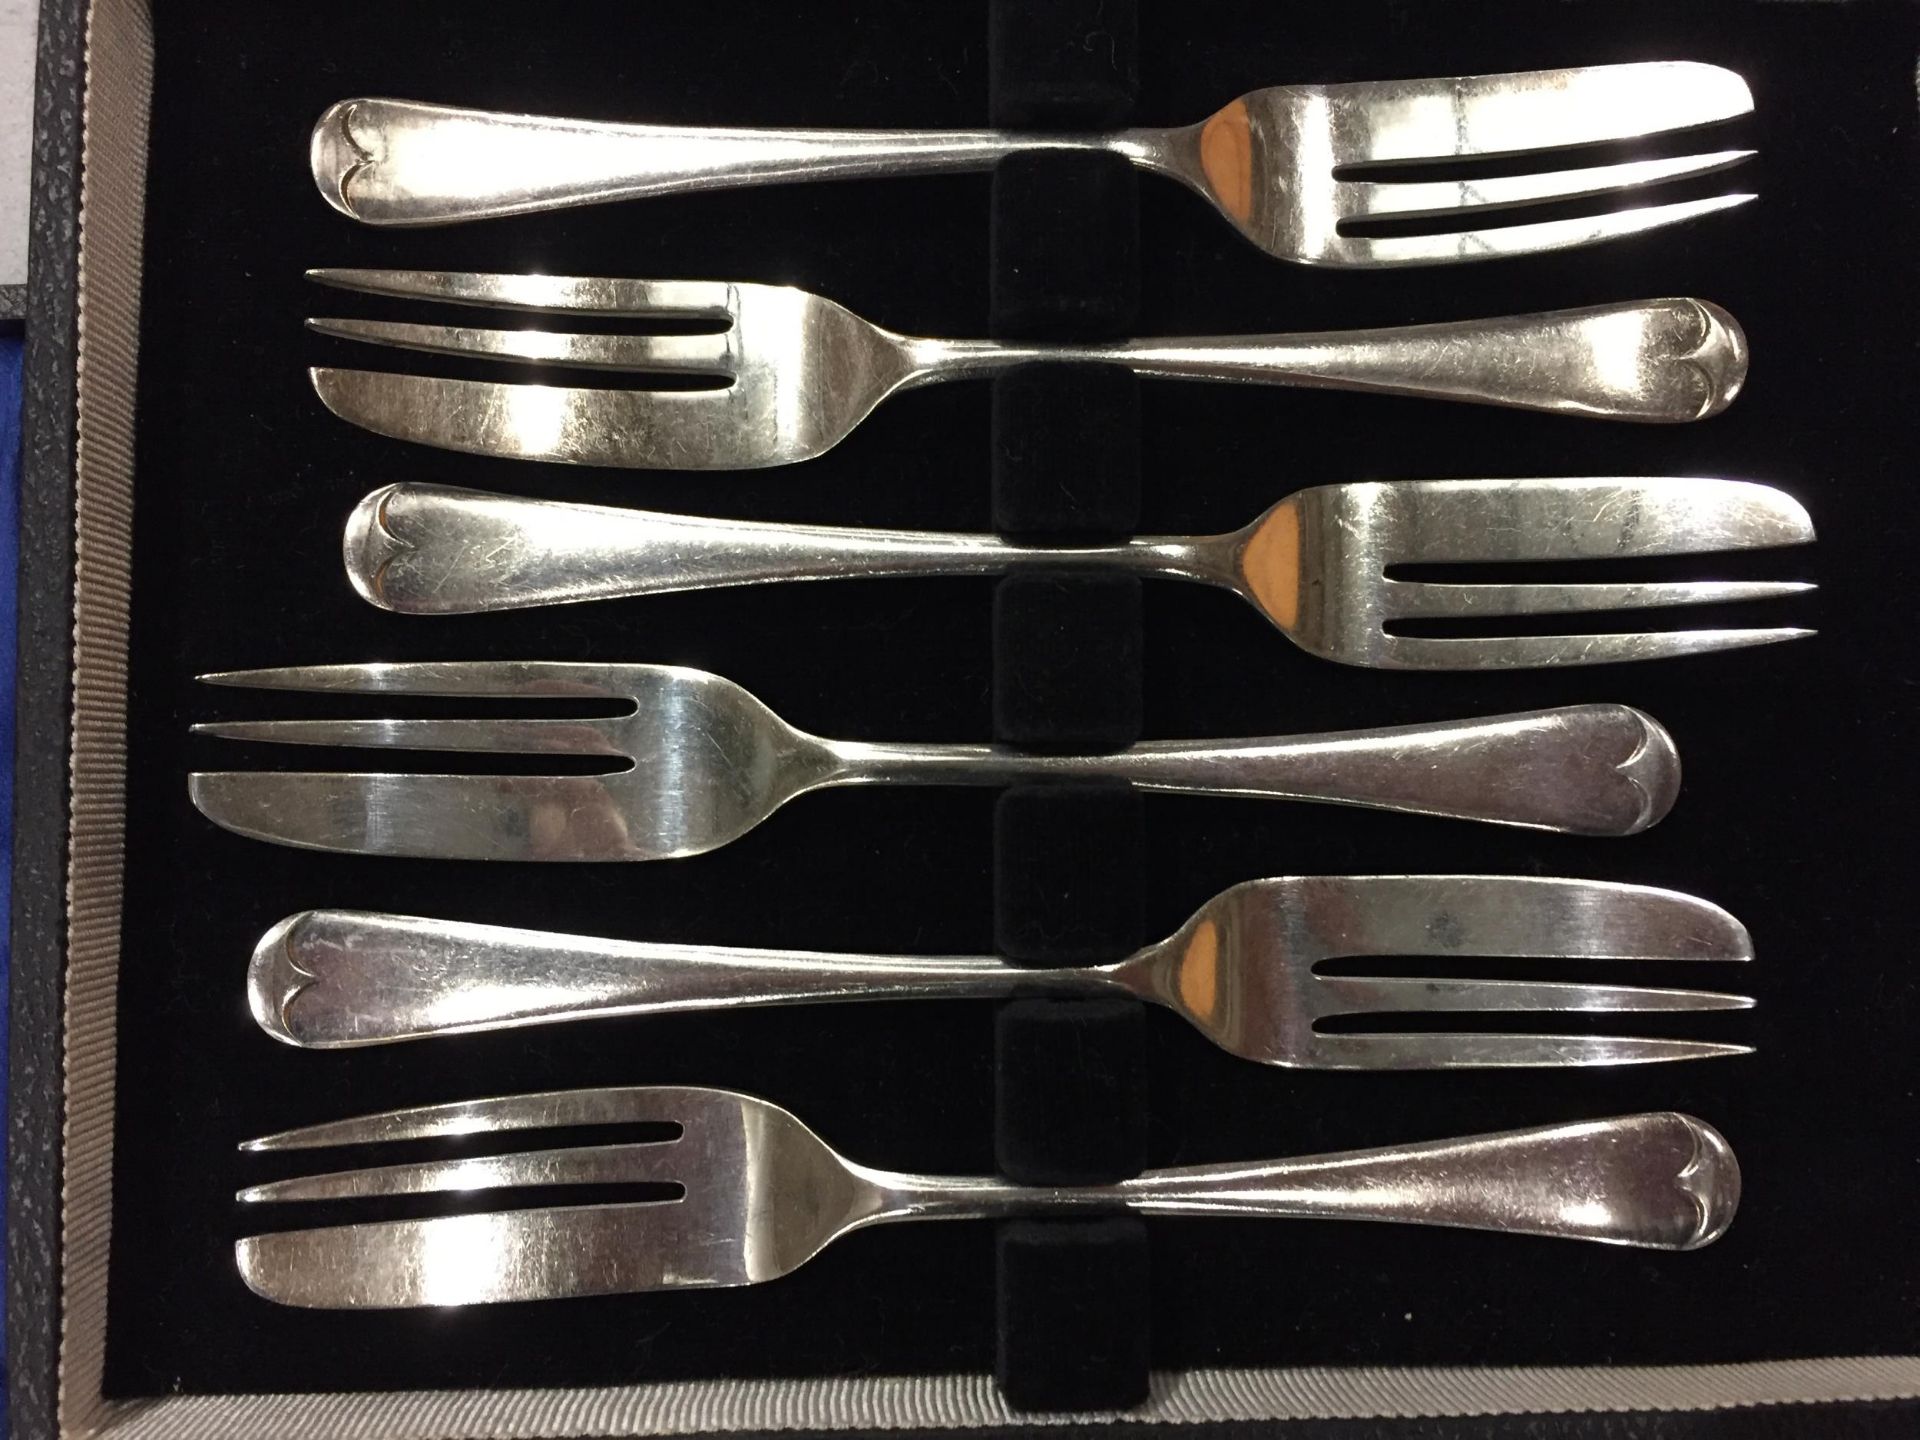 THREE BOXES OF FLATWARE TO INCLUDE KNIVES, FORKS AND TEASPOONS - Image 4 of 4